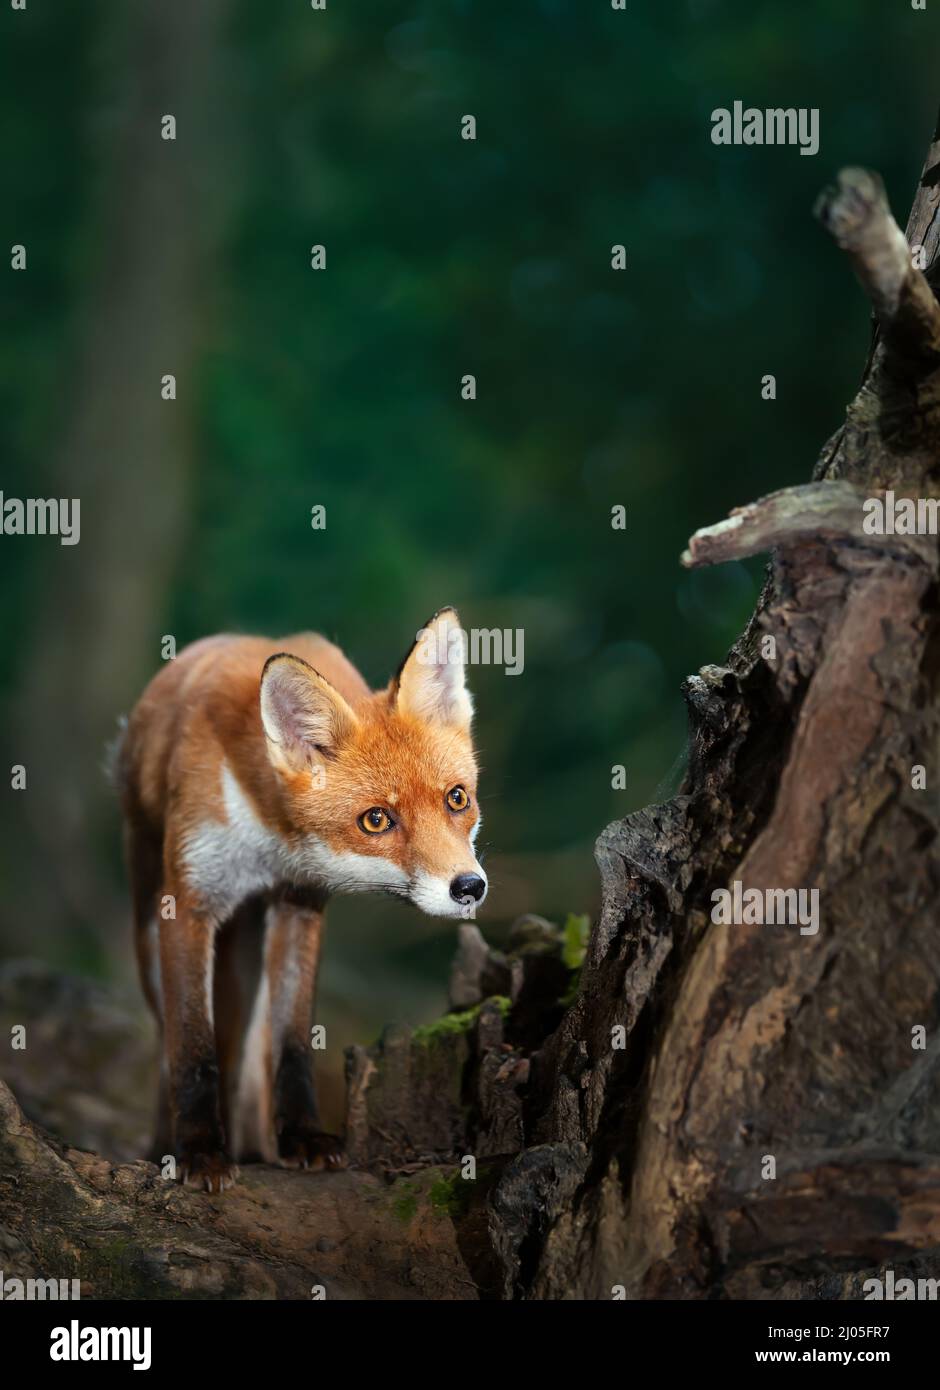 Close up of a Red fox (Vulpes vulpes) cub in forest, UK. Stock Photo